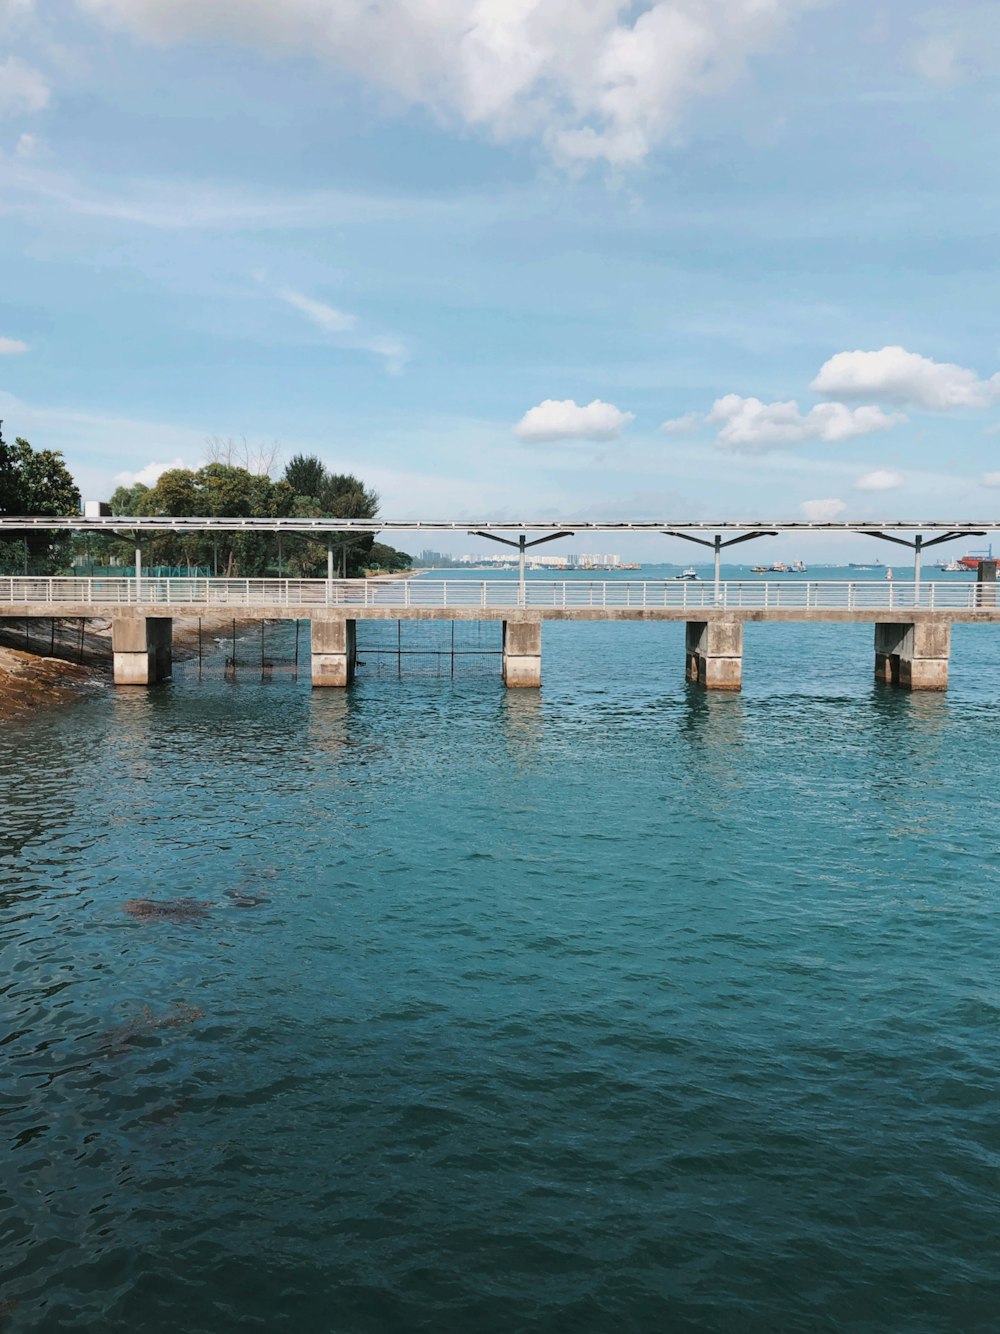 a bridge over a body of water under a cloudy blue sky